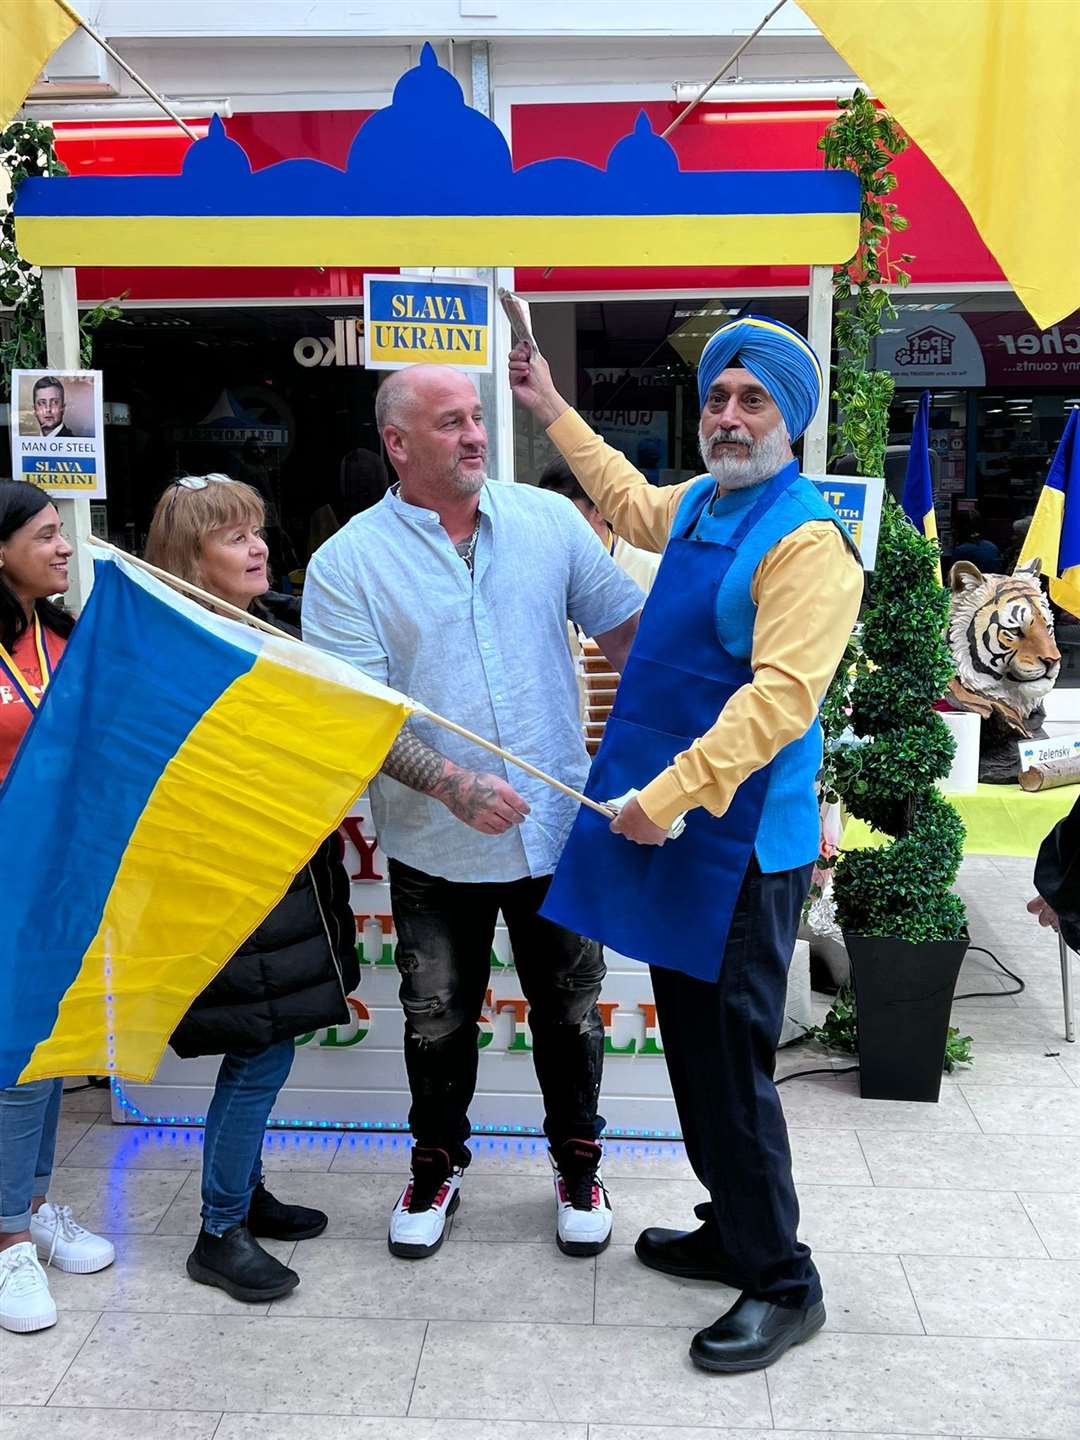 One of the donors, Mr Shaun Welch, donated £250 for a single samosa in support of the Ukraine appeal